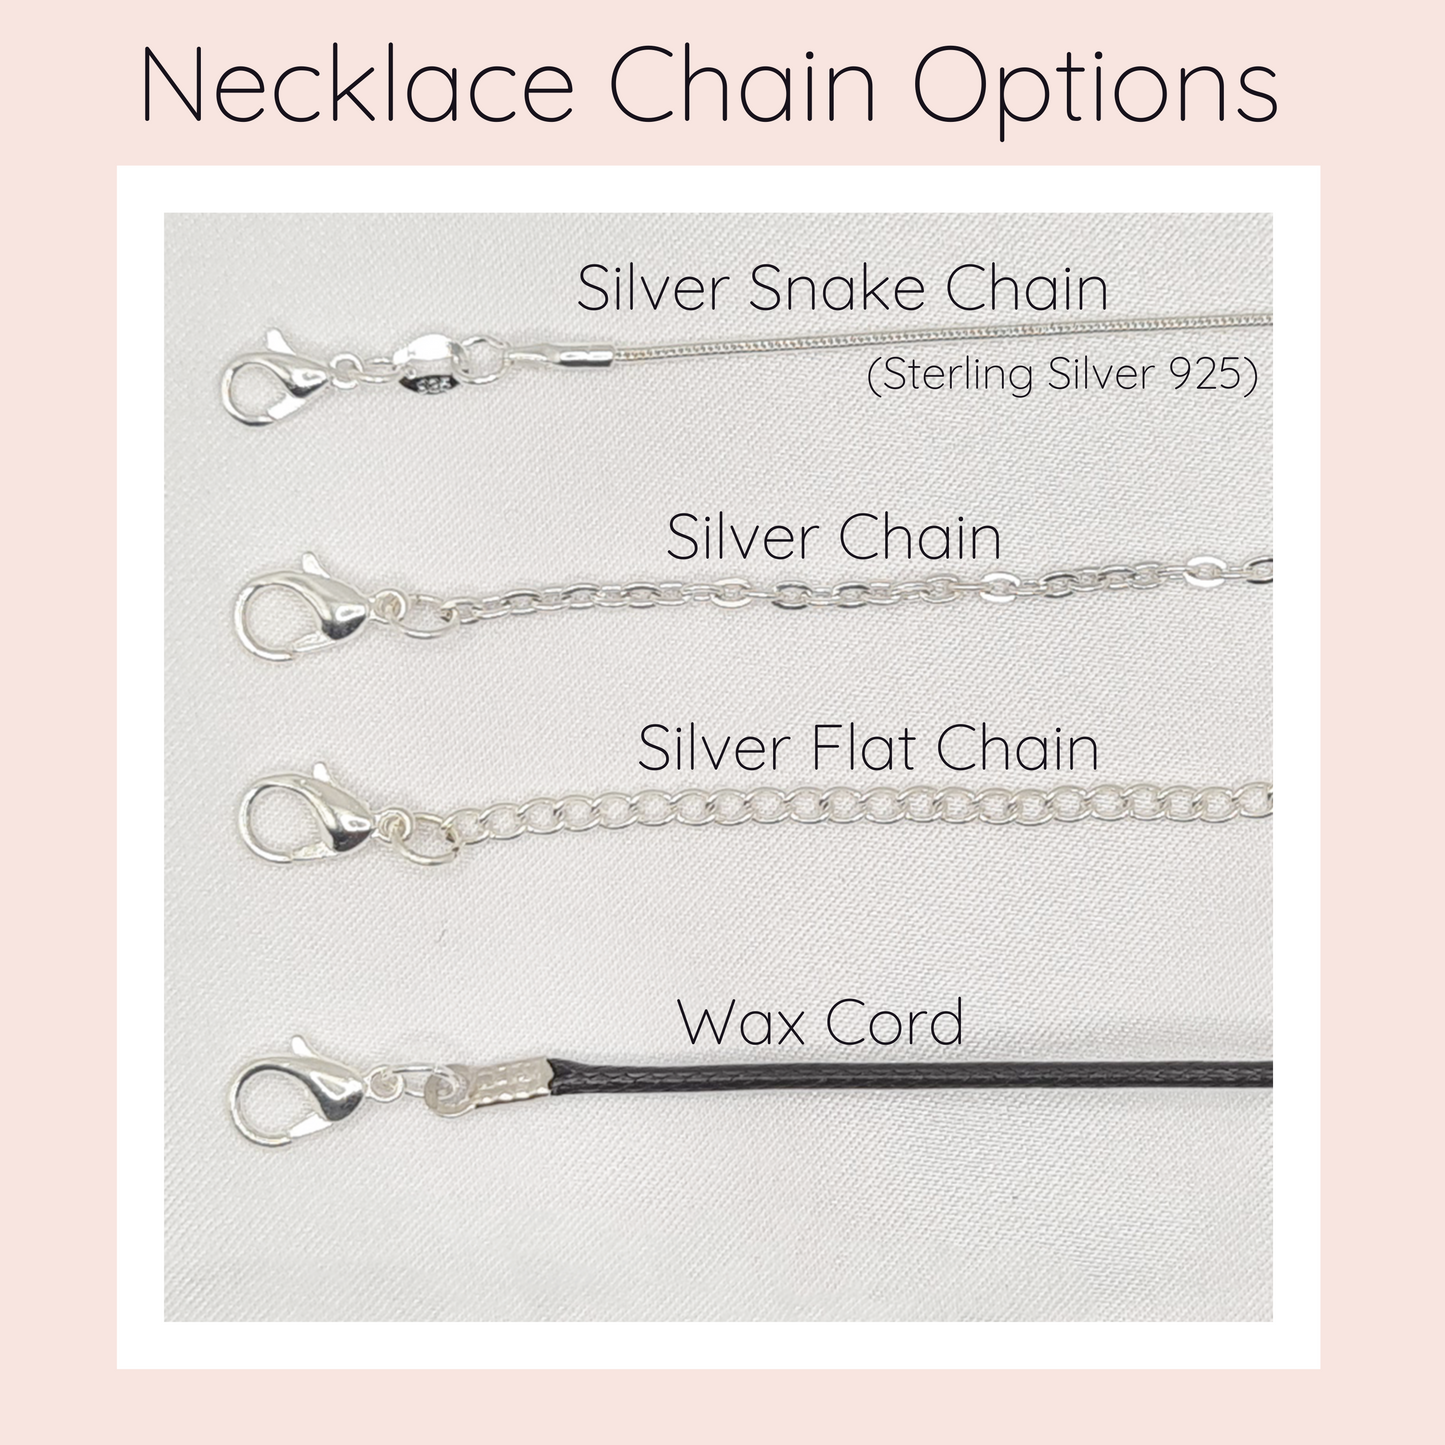 Necklace chain option chart